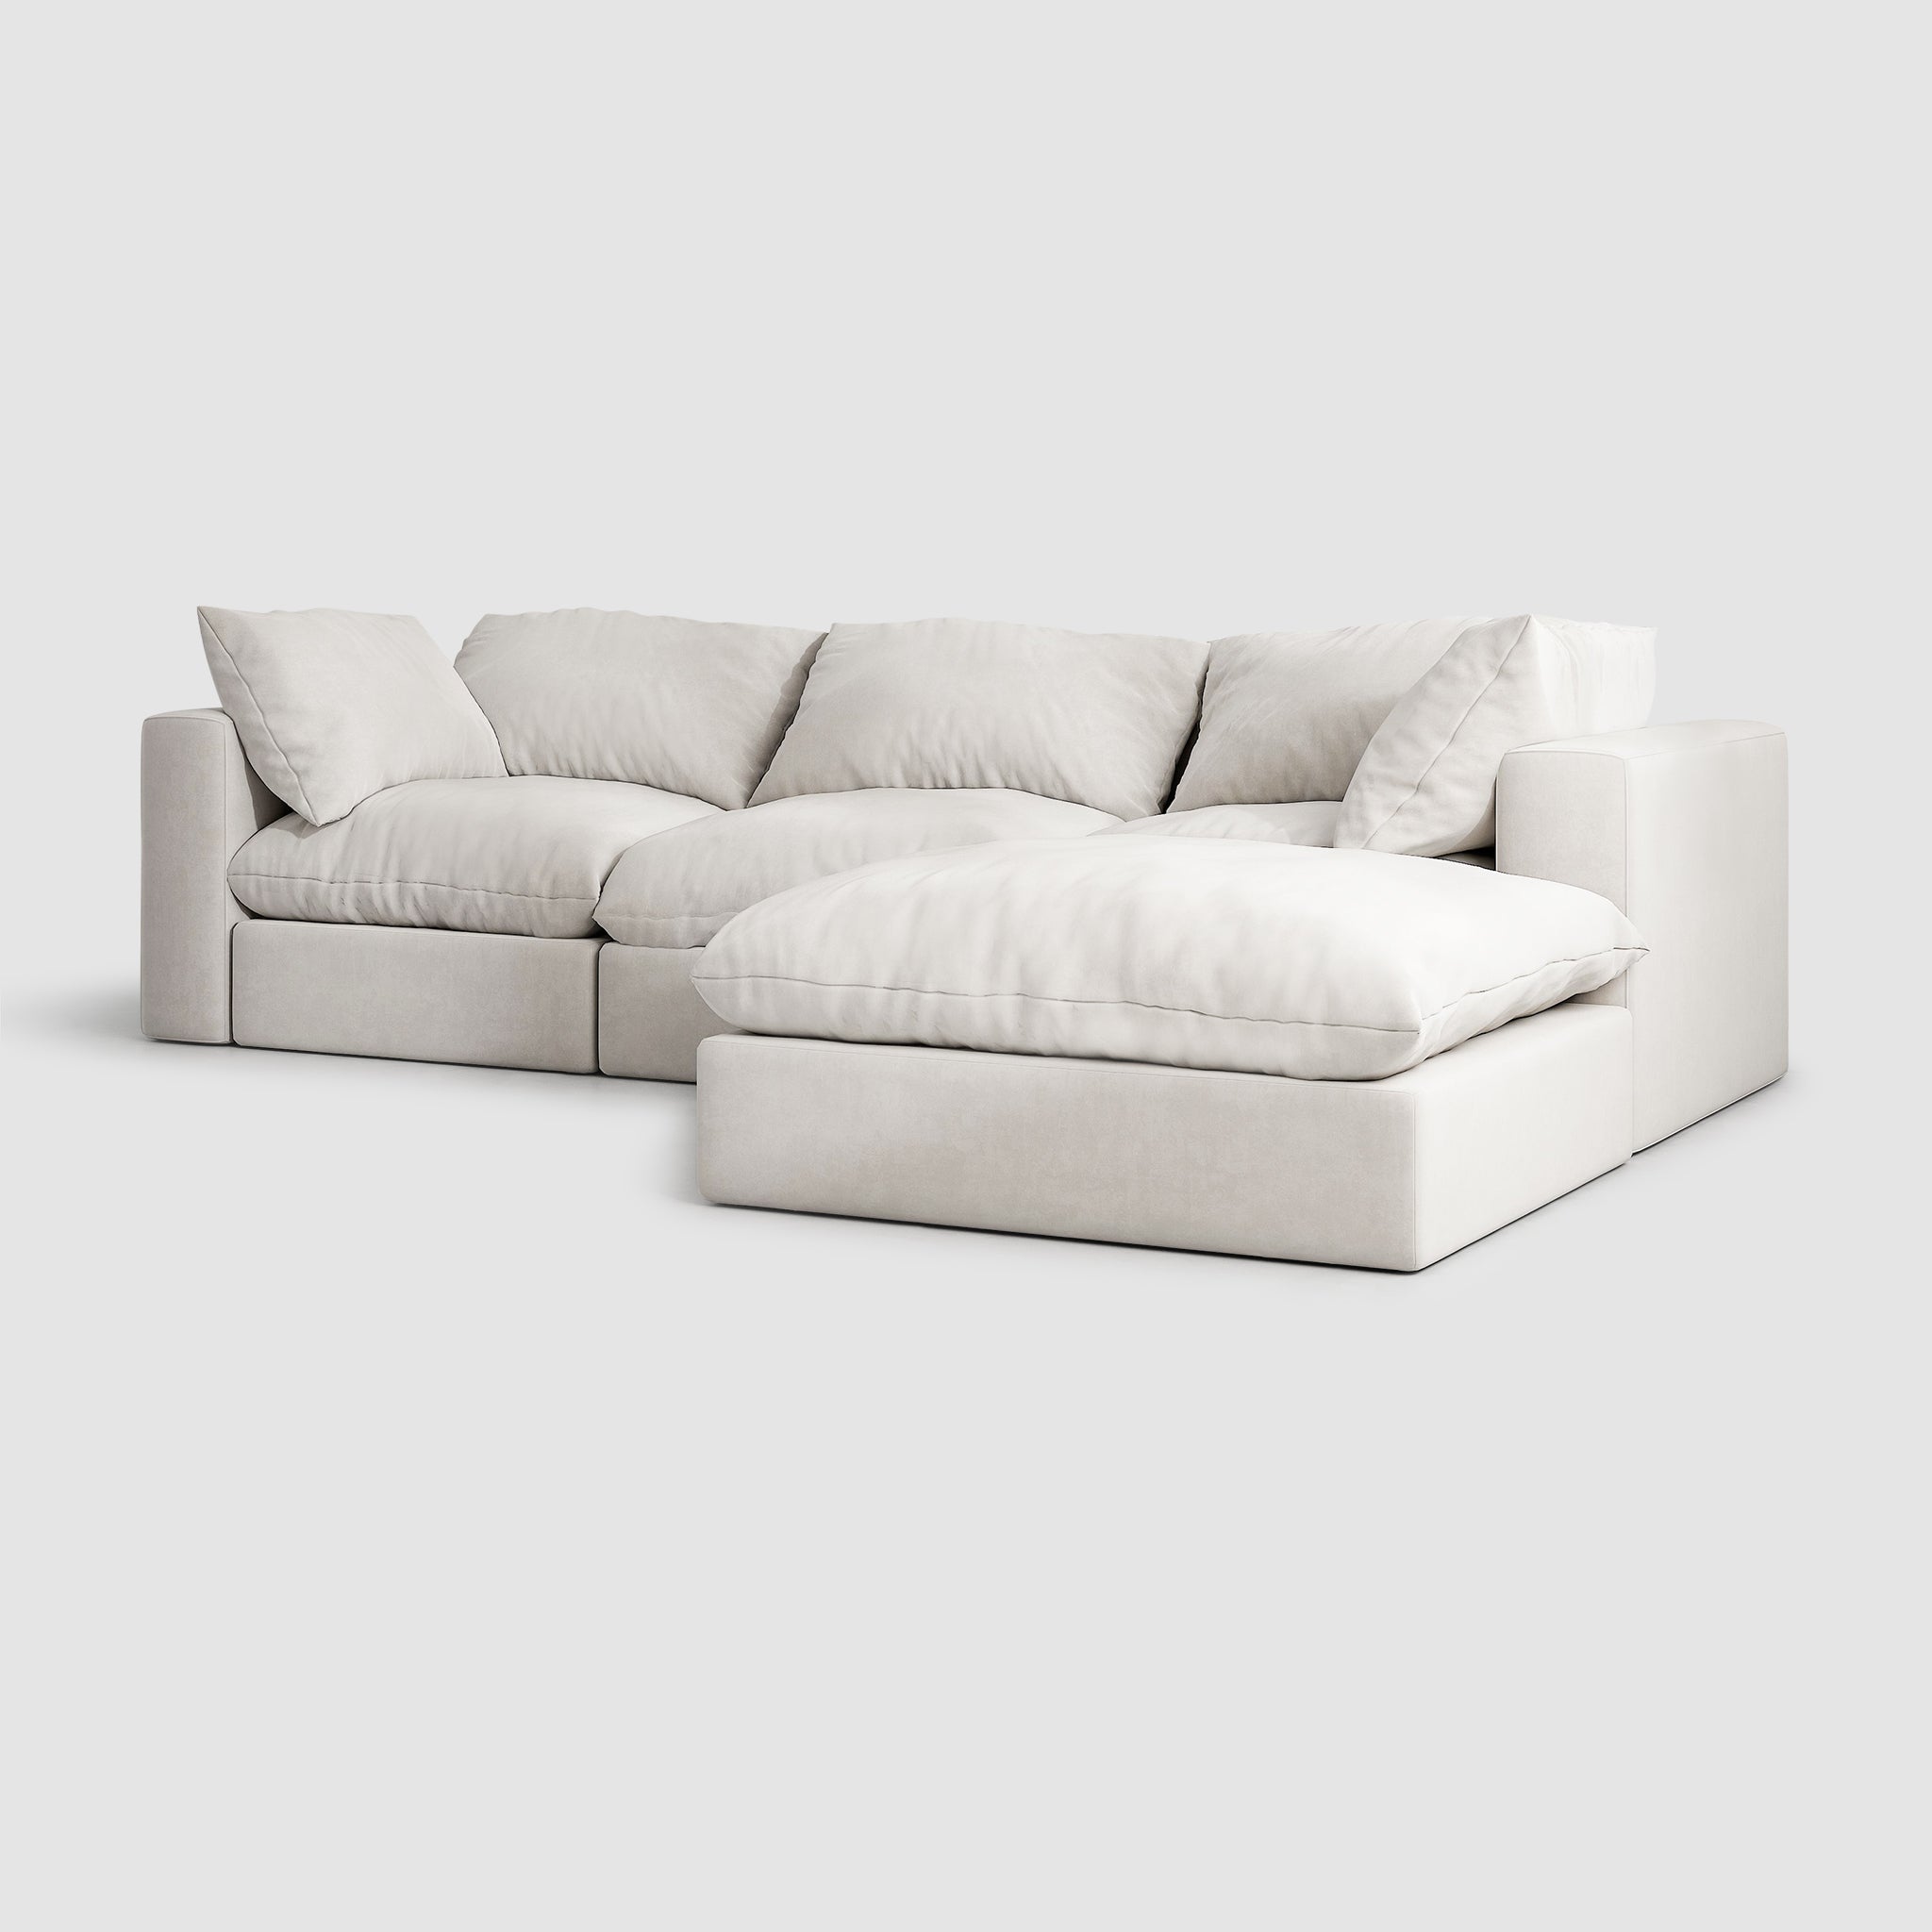 White sectional couch with detachable ottoman in a modern living room. The couch has a solid wood frame and is upholstered in white fabric with removable covers. This luxurious couch is perfect for relaxing in style.